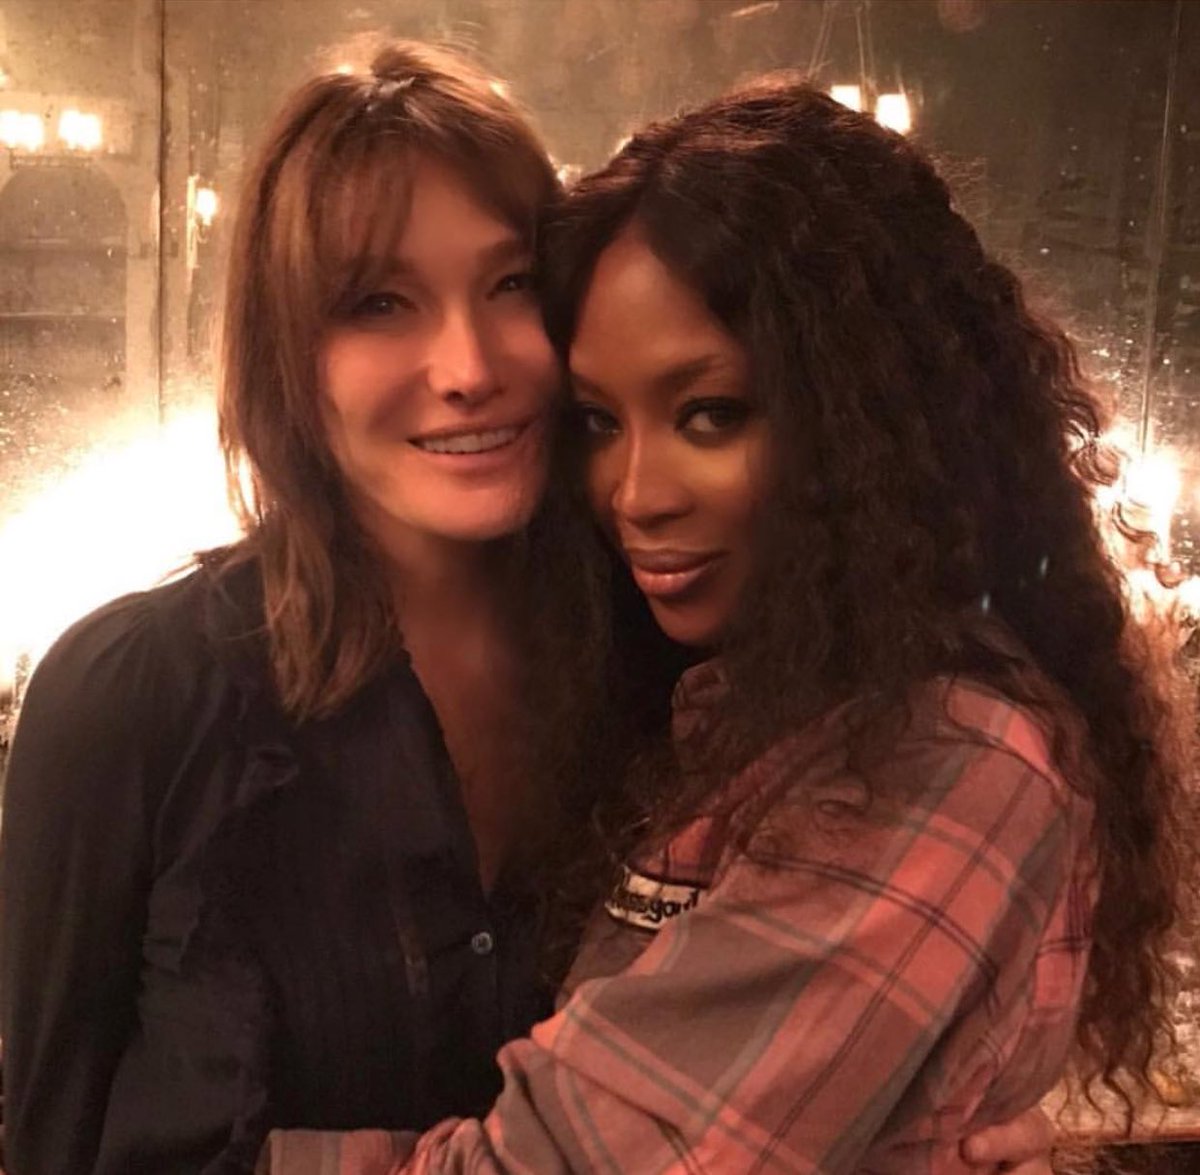 #myfirstlady #carlabruni #FrenchTouch Out Now !! #proud of you baby girl ????????❤️❤️❤️❤️???????????????????? https://t.co/joeds2UIPe